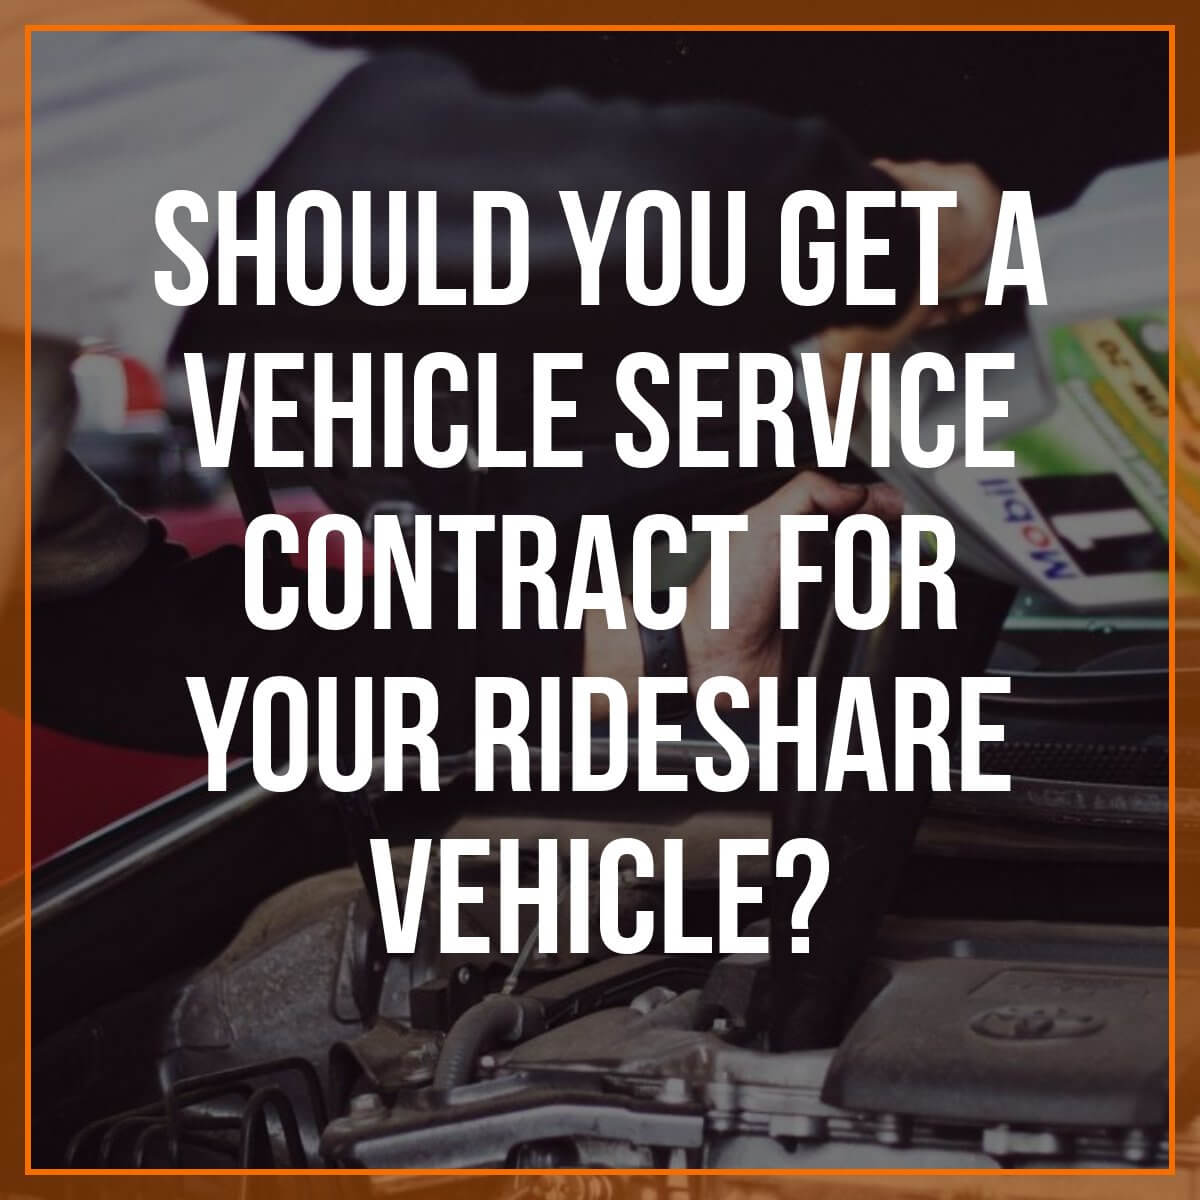 Today we have a sponsored post from Rideshare Knight (you can check them out here). They’re one of the first companies to create an extended, high mileage vehicle service contract that is specifically for Uber and Lyft drivers. Up until now, traditional warranties have excluded commercial use and a lot of drivers I know have been ruined by major repairs that occur at EXACTLY the wrong time.